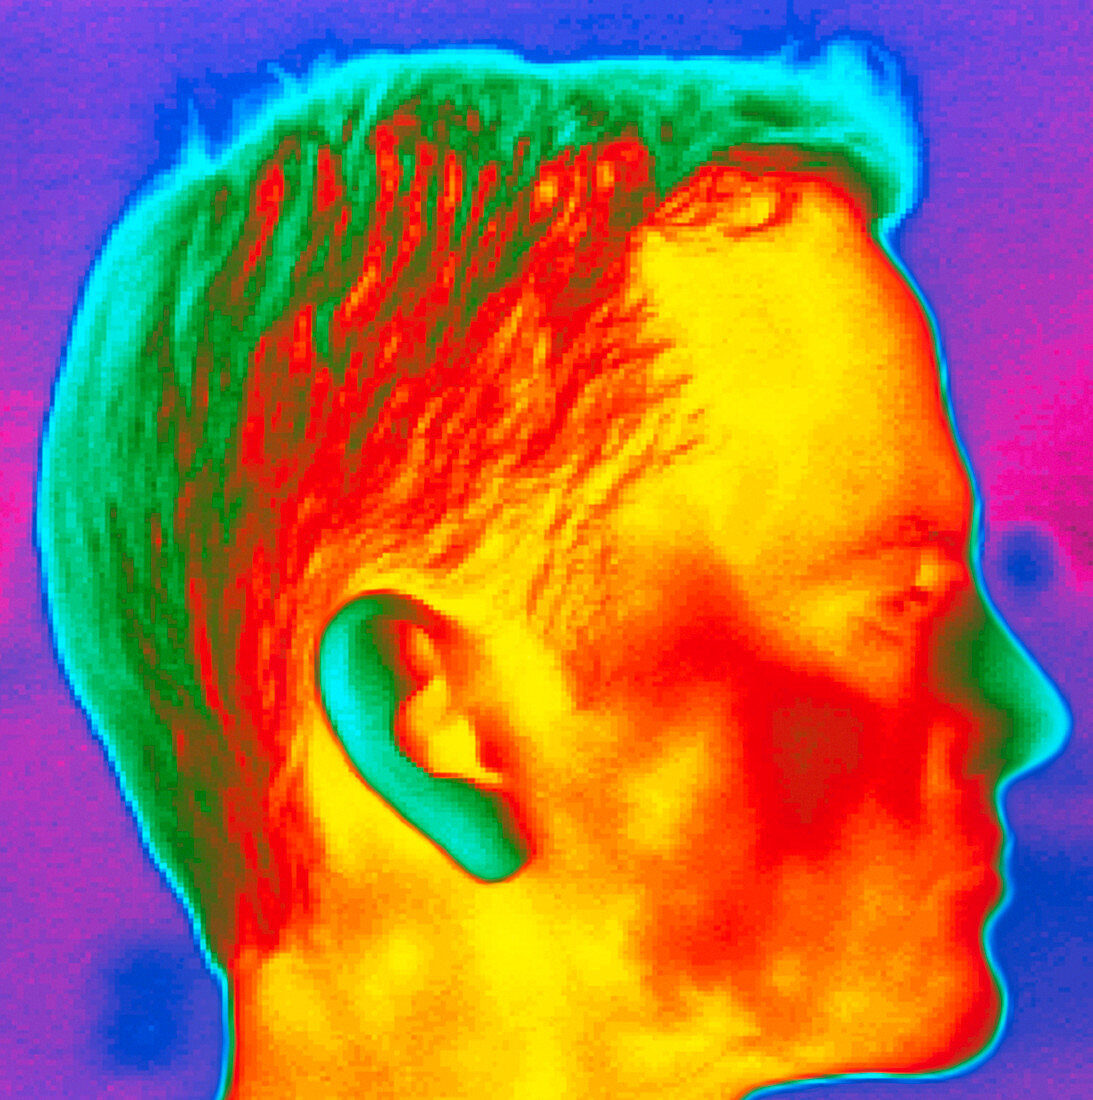 Thermogram of a man's head in profile